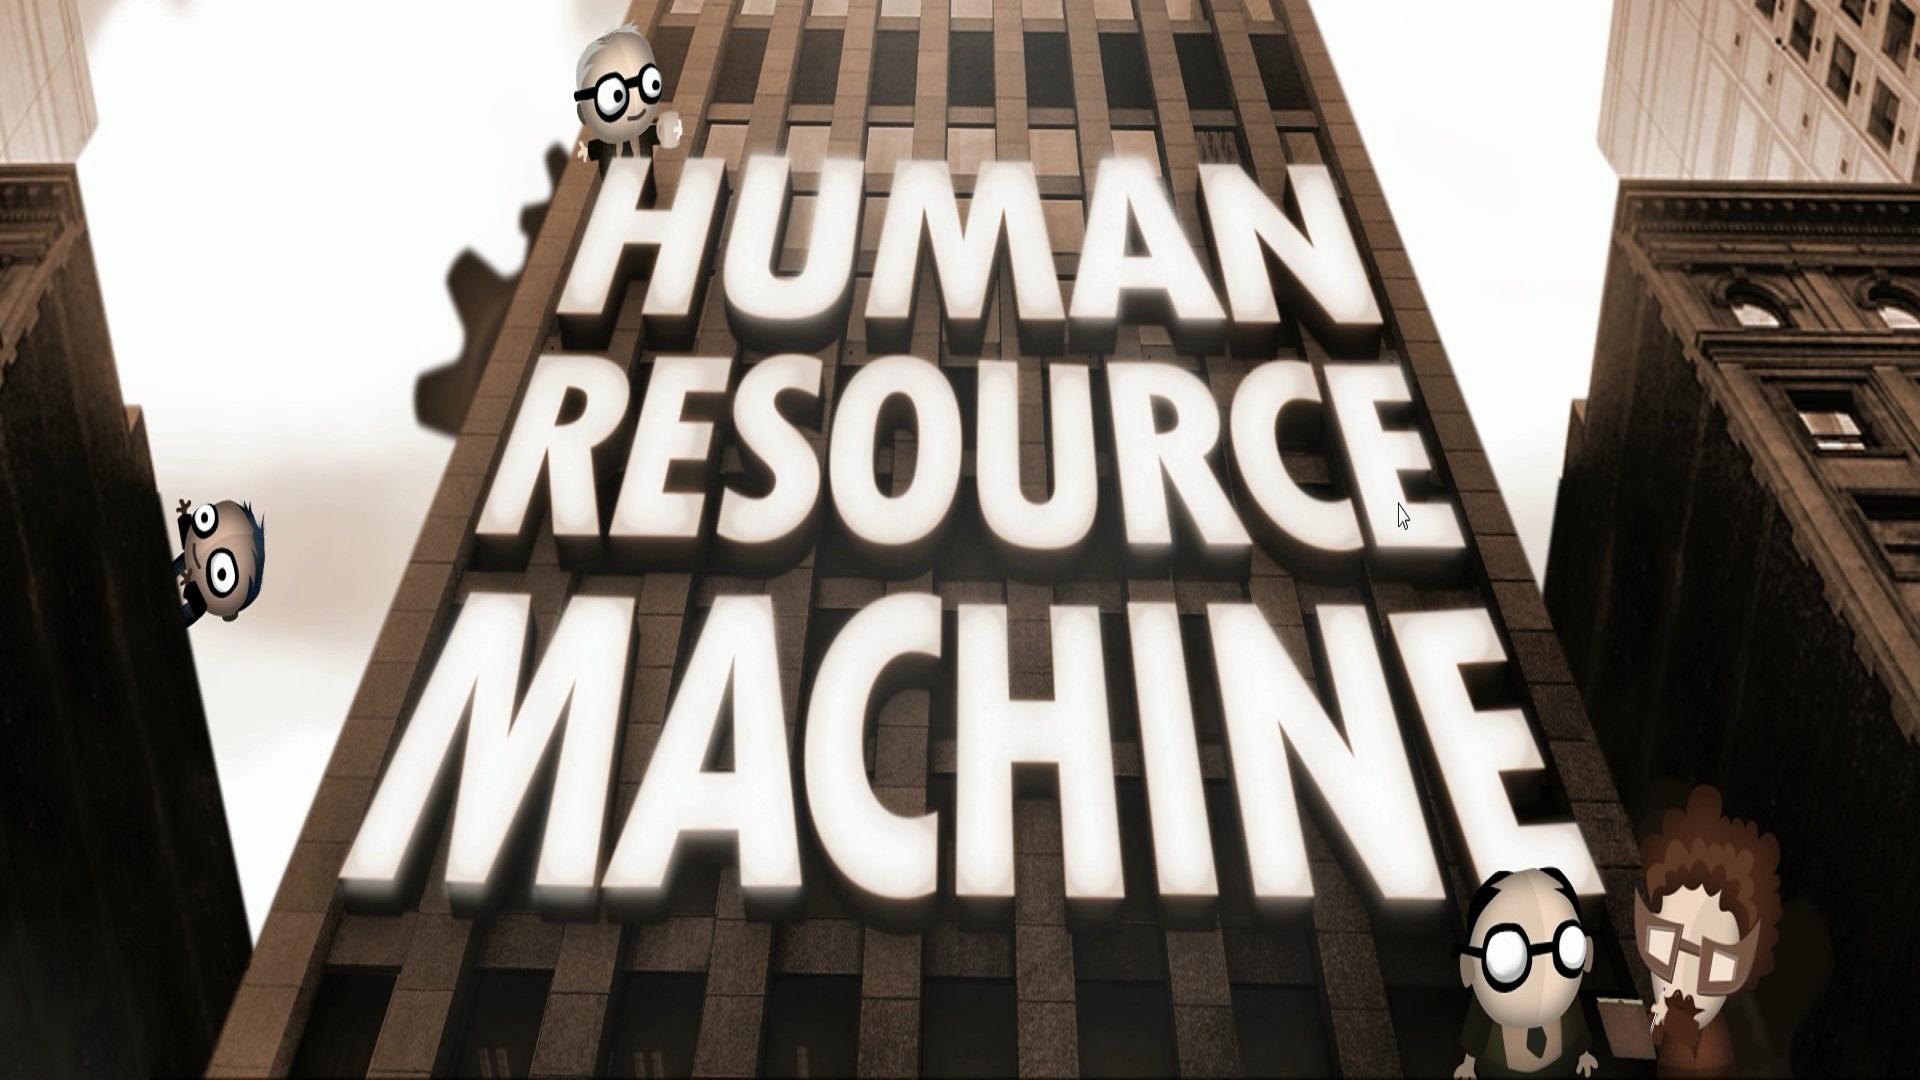 download the last version for iphoneHuman Resource Machine